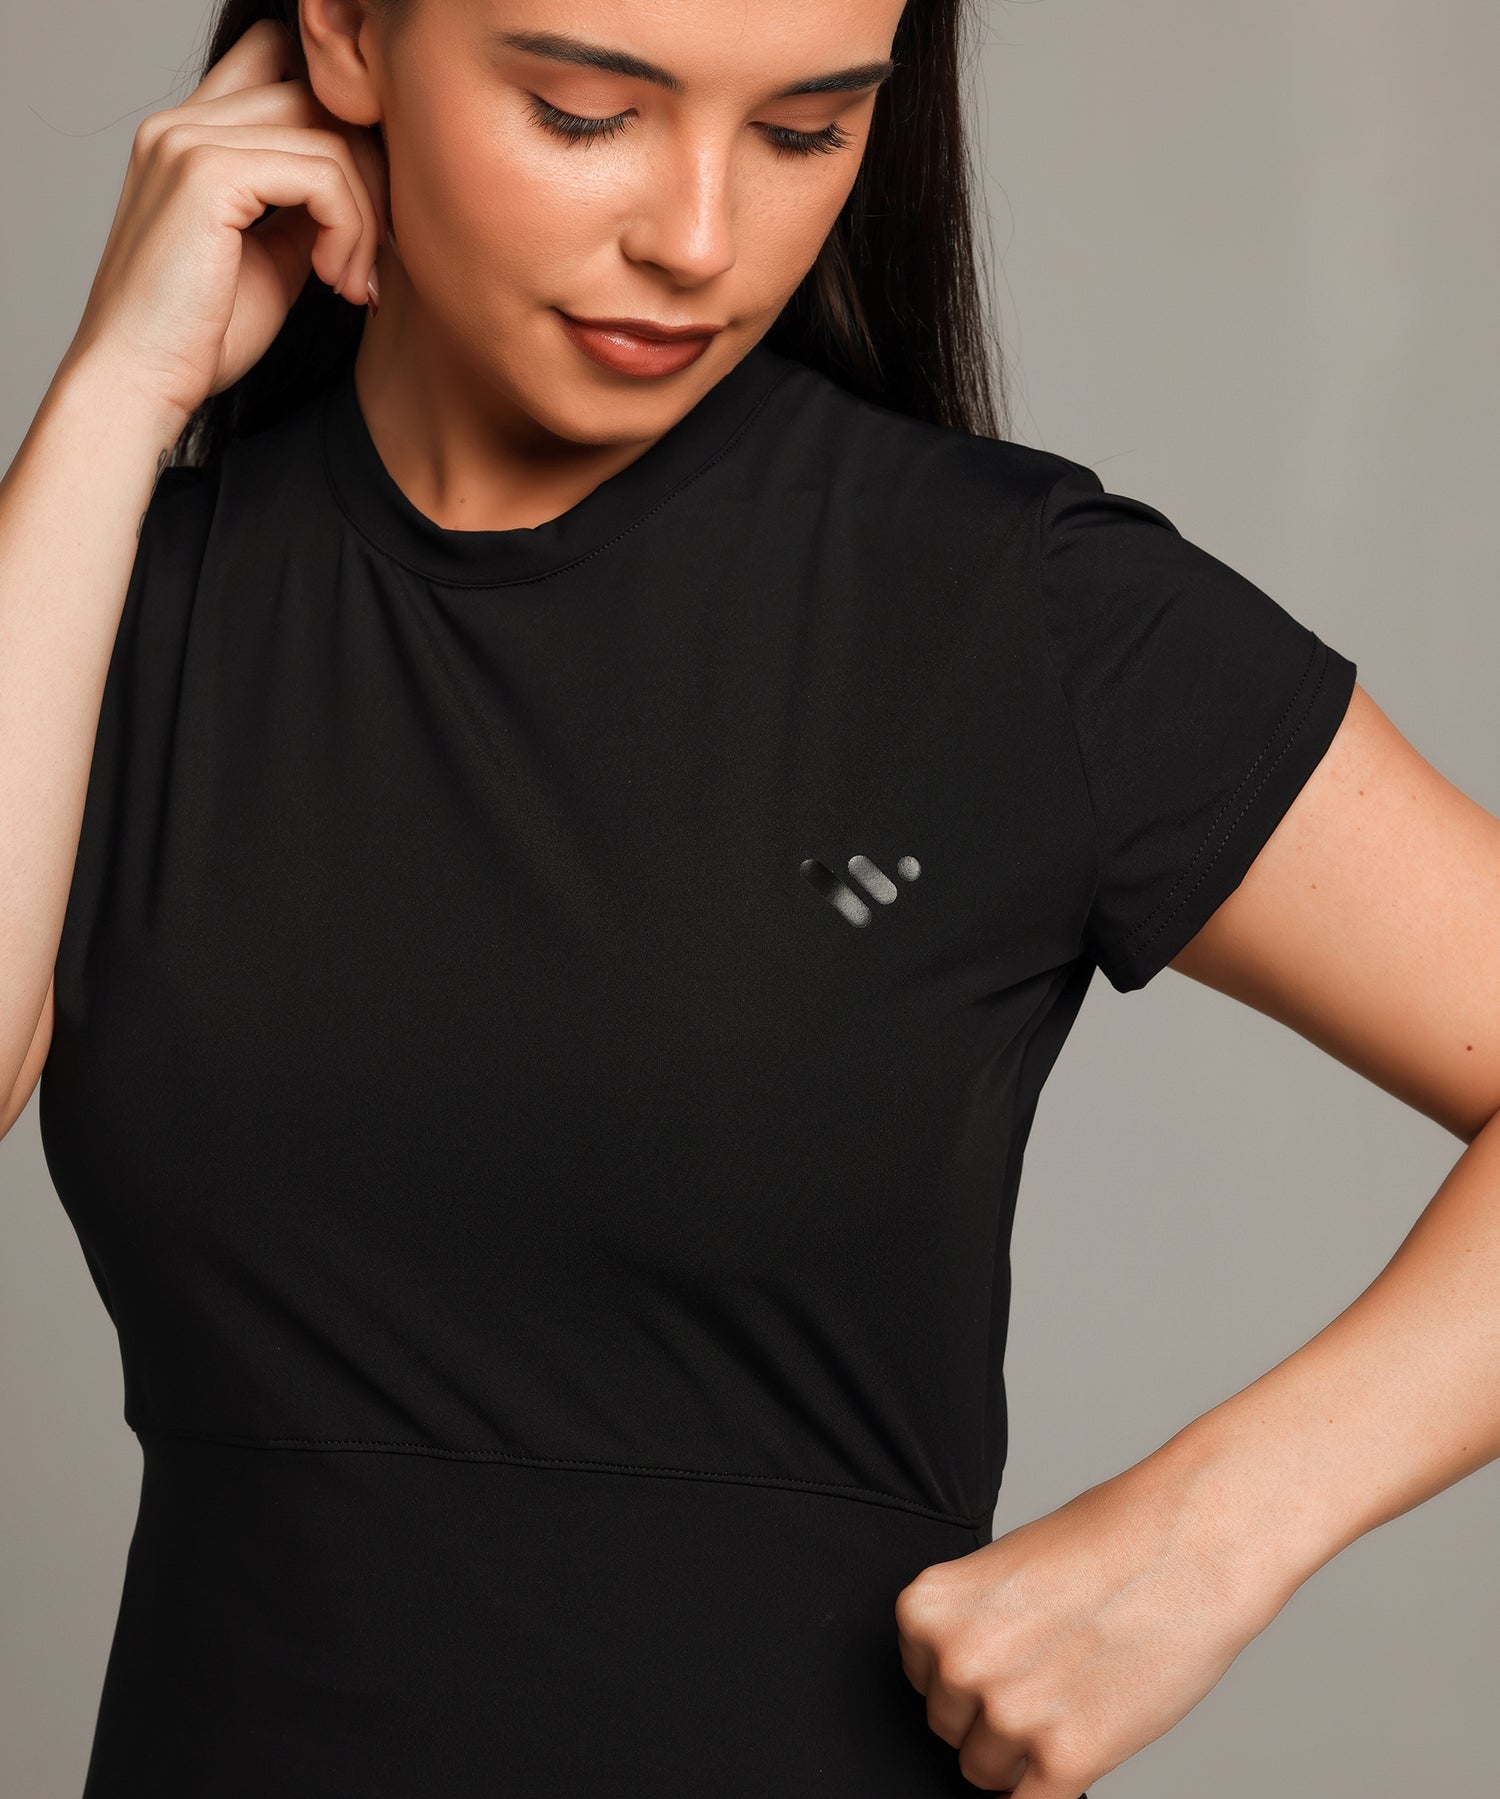 Capped Sleeve Compression Top